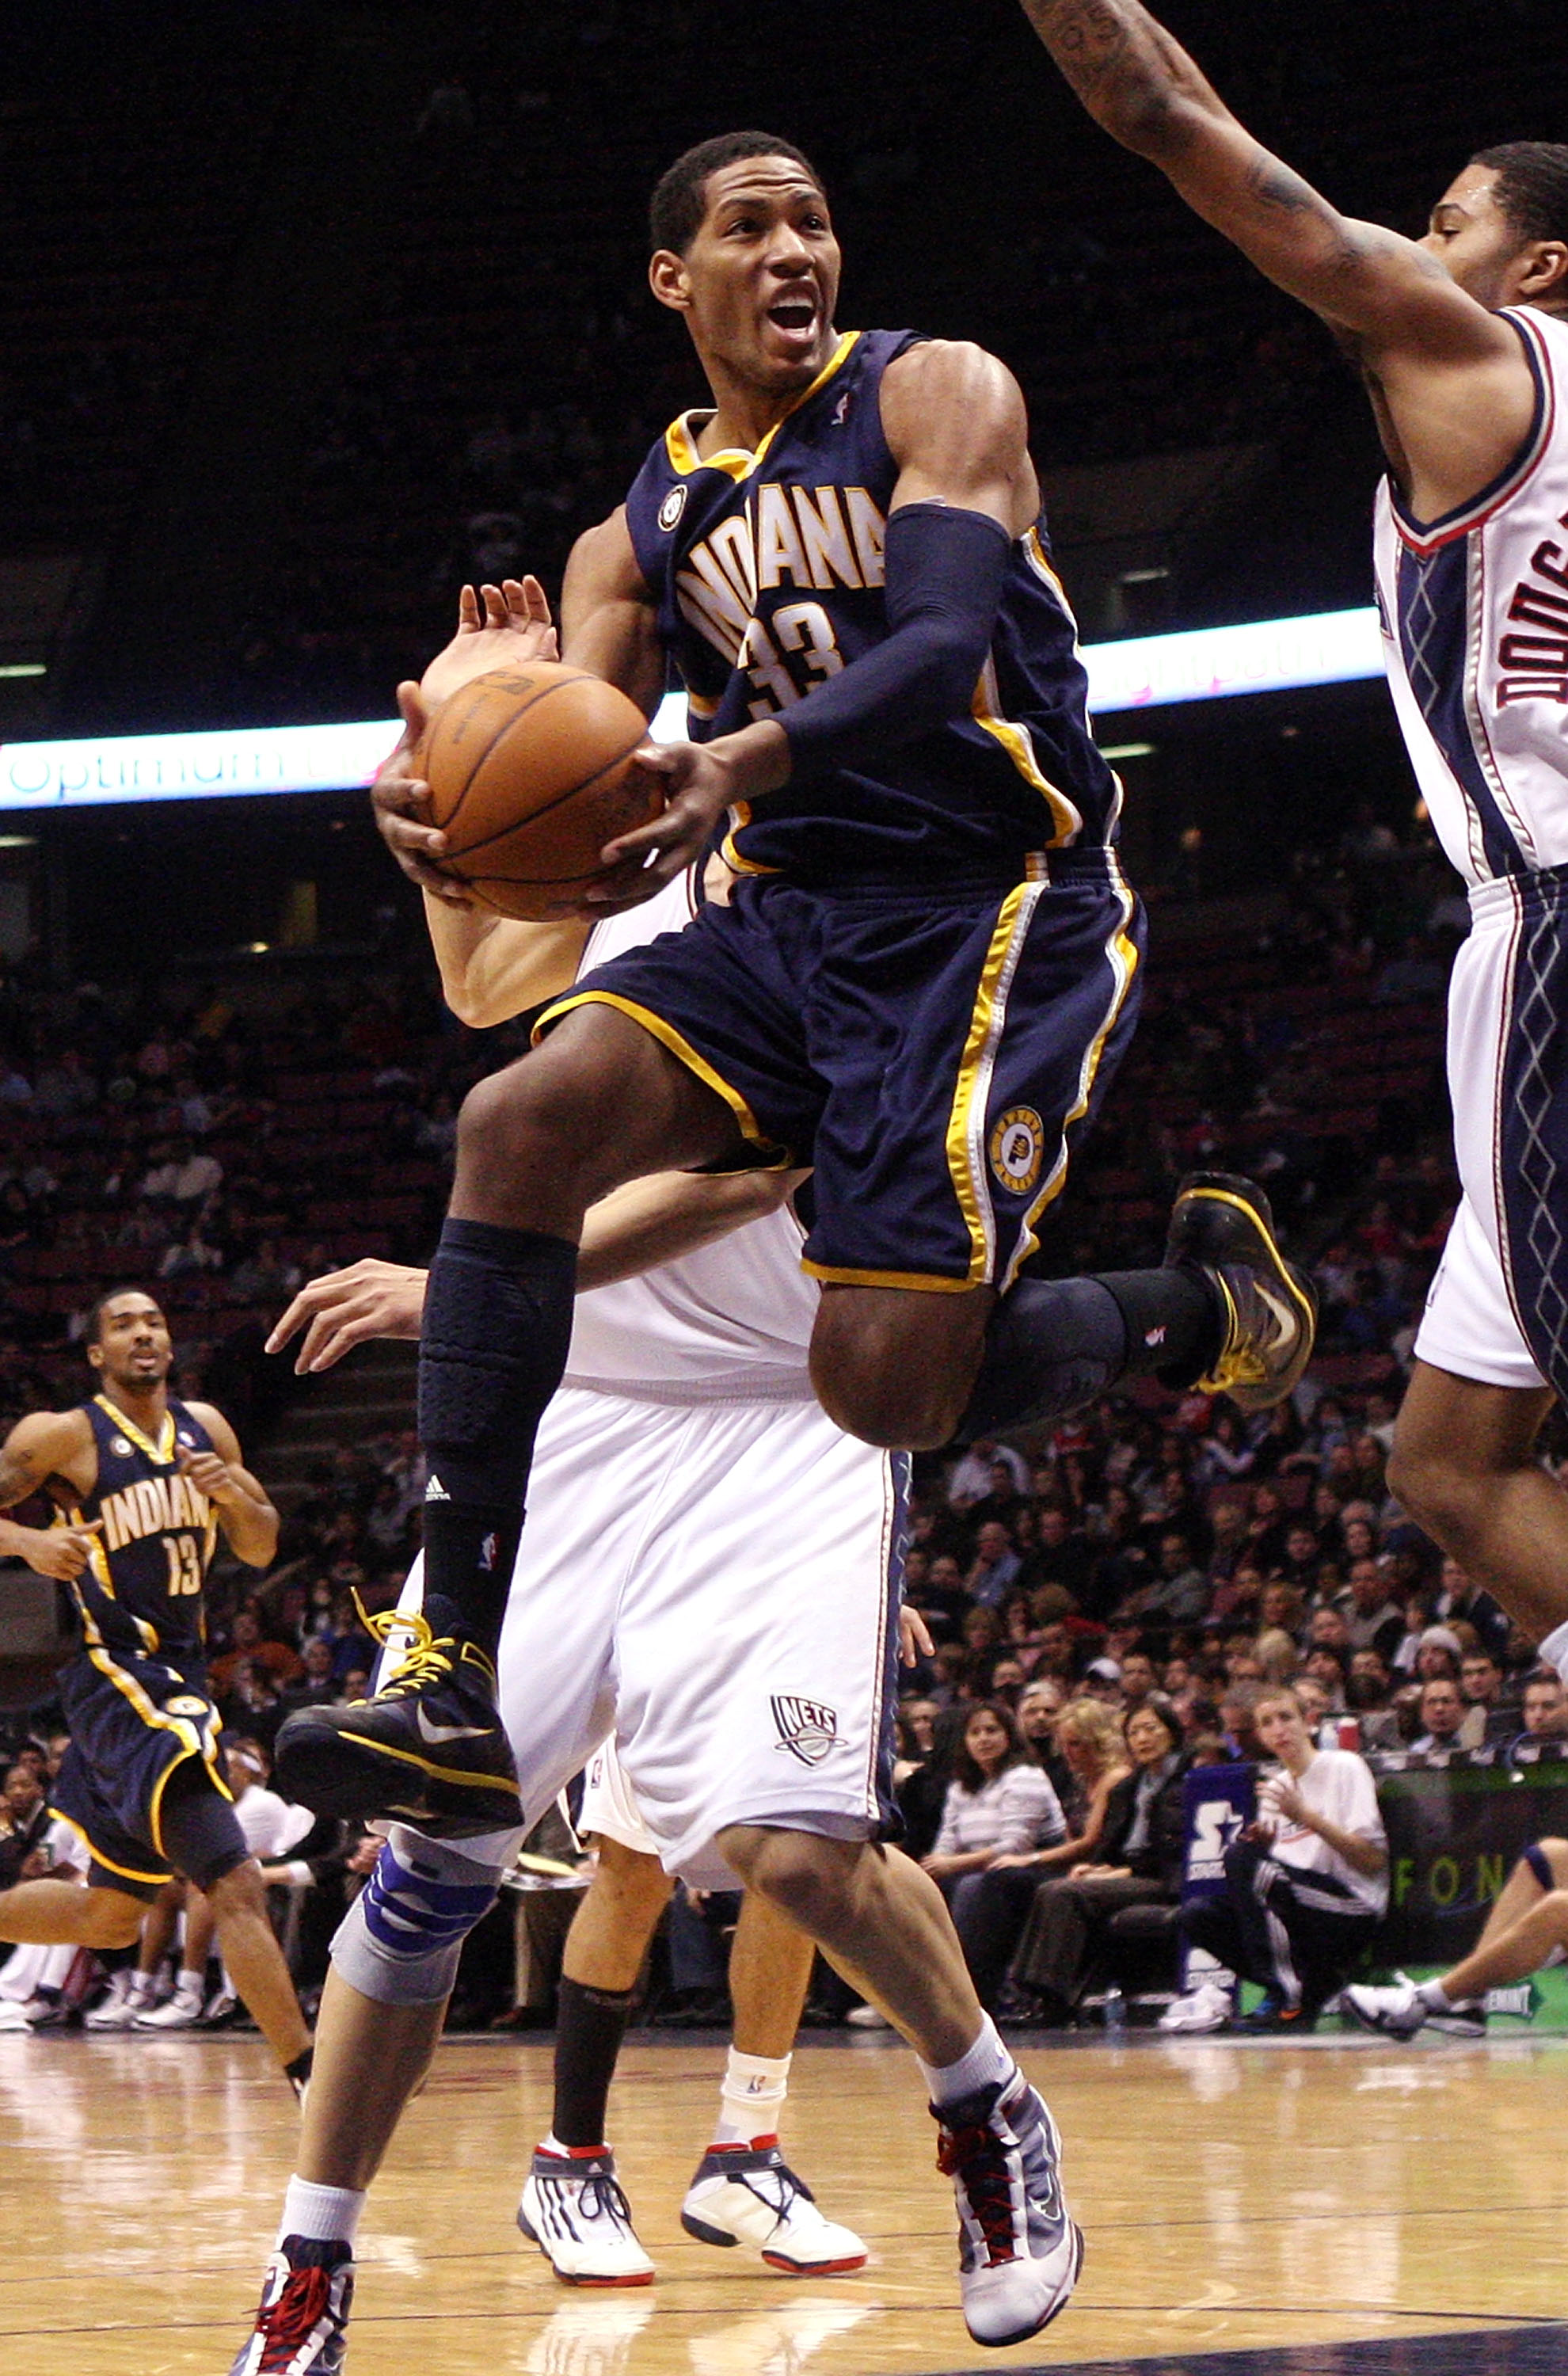 EAST RUTHERFORD, NJ - JANUARY 15:  Danny Granger #33 of the Indiana Pacers drives to the basket against the New Jersey Nets at the Izod Center on January 15, 2010 in East Rutherford, New Jersey. NOTE TO USER: User expressly acknowledges and agrees that, b